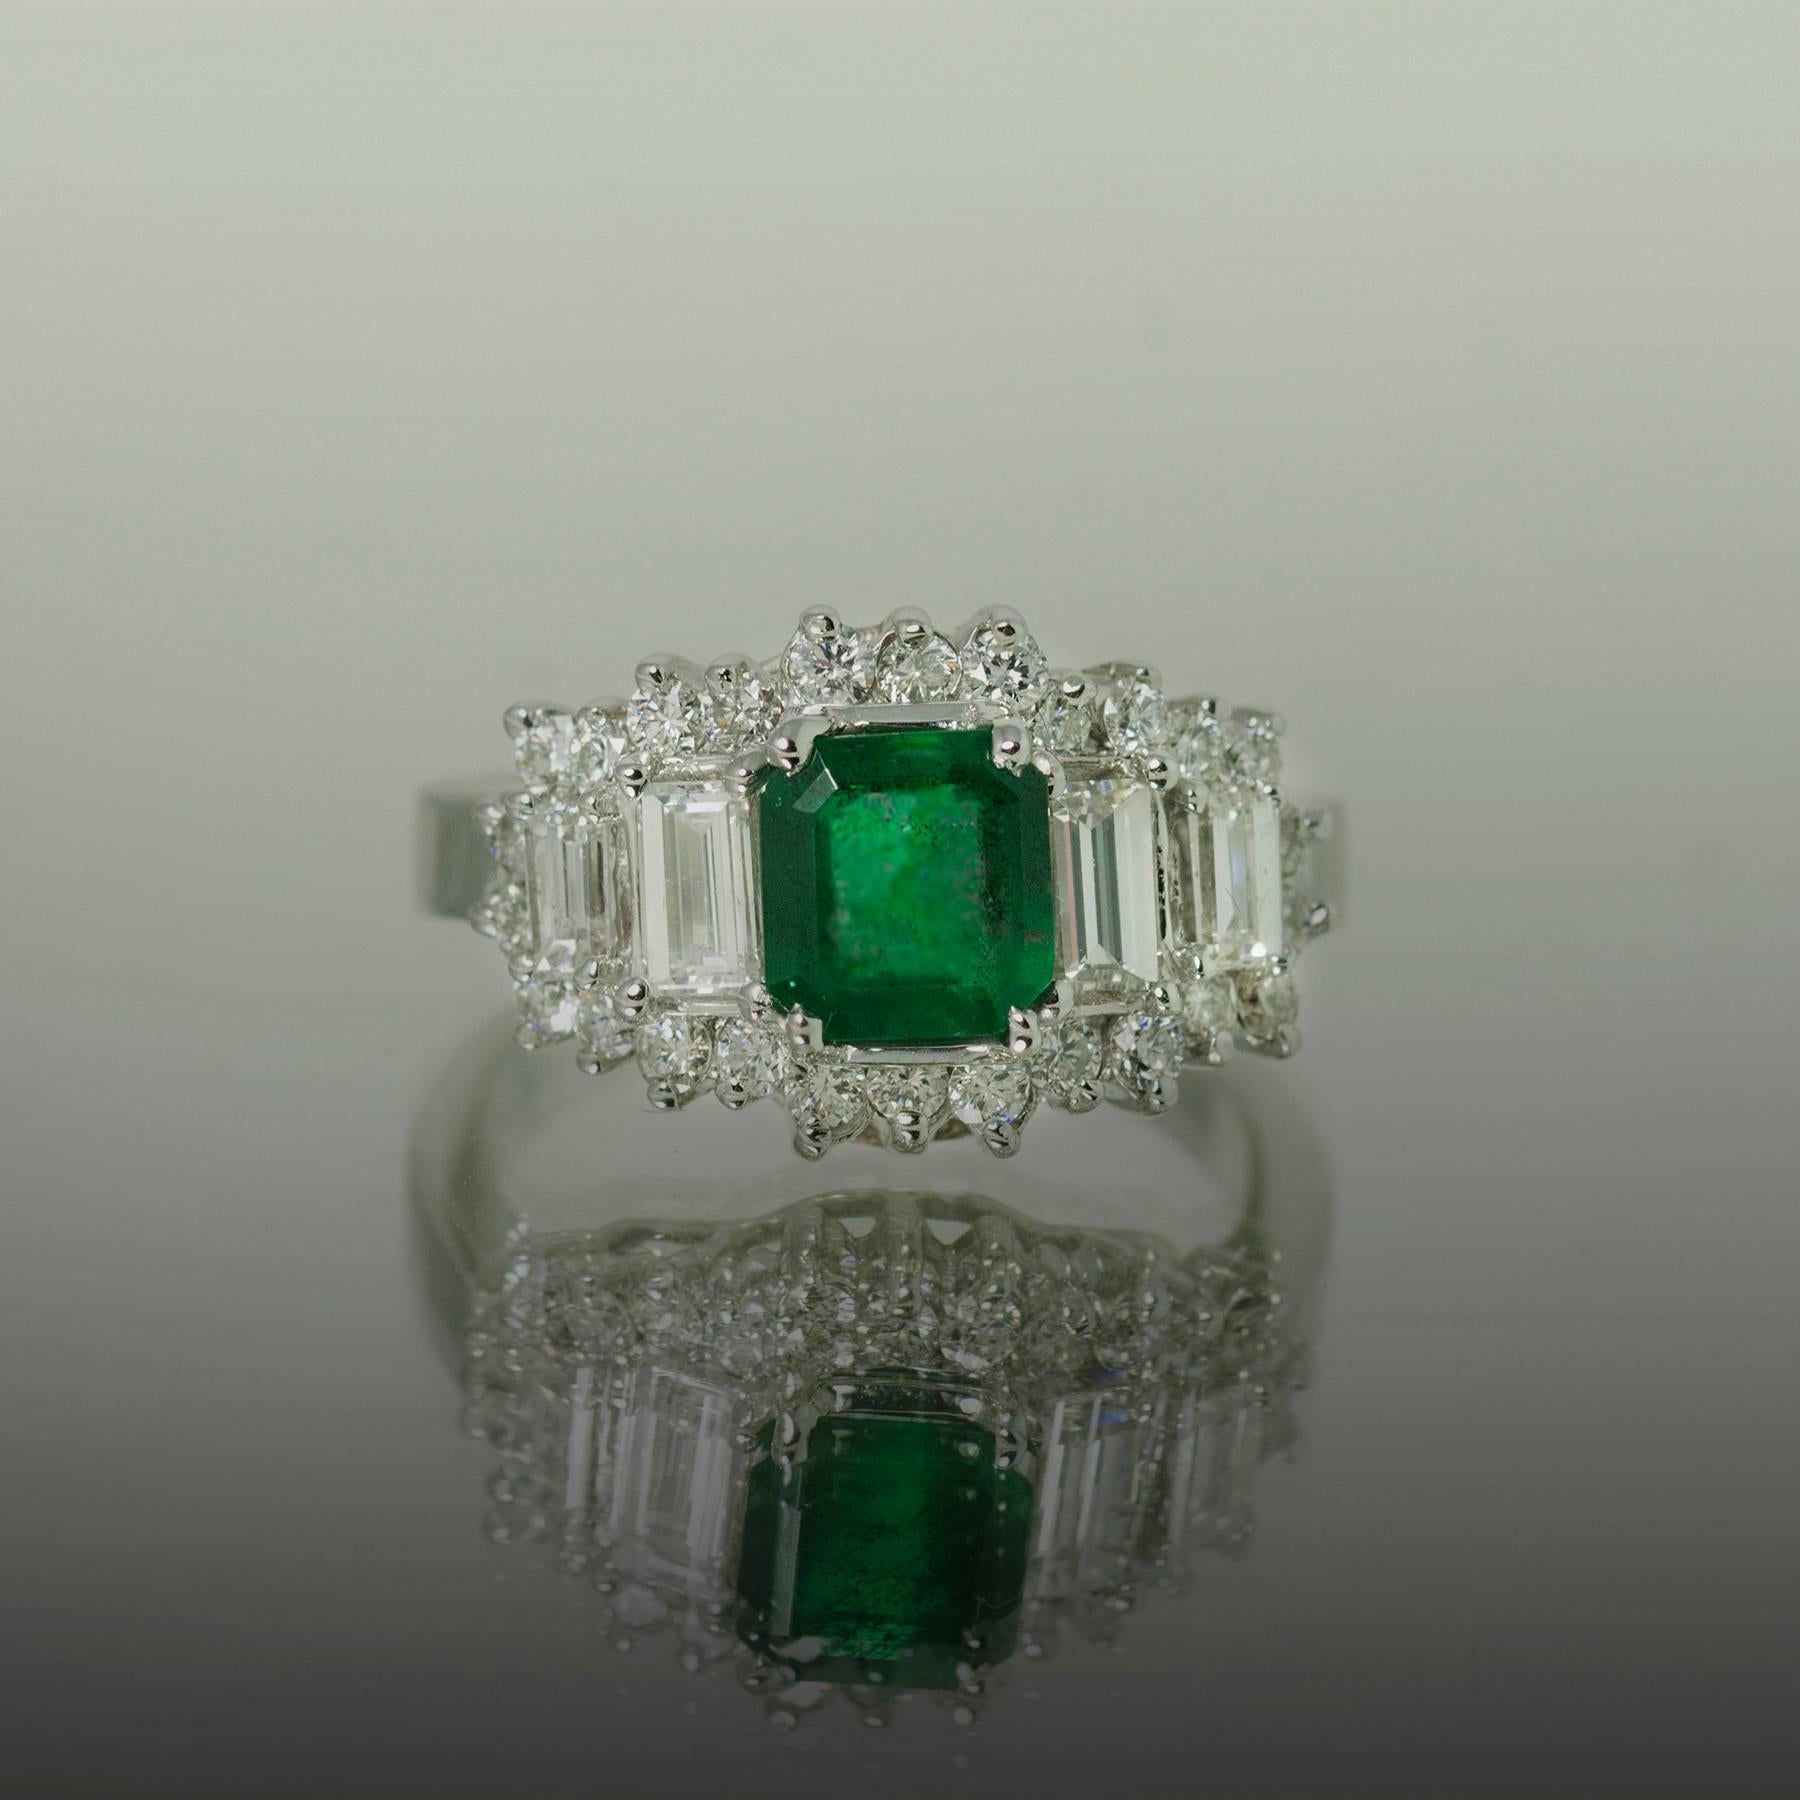 14k White gold ring with 1 square emerald cut emerald weighing 1.28 carats and round brilliant and straight baguette diamonds weighing 1.55 carats, Size 6 1/2